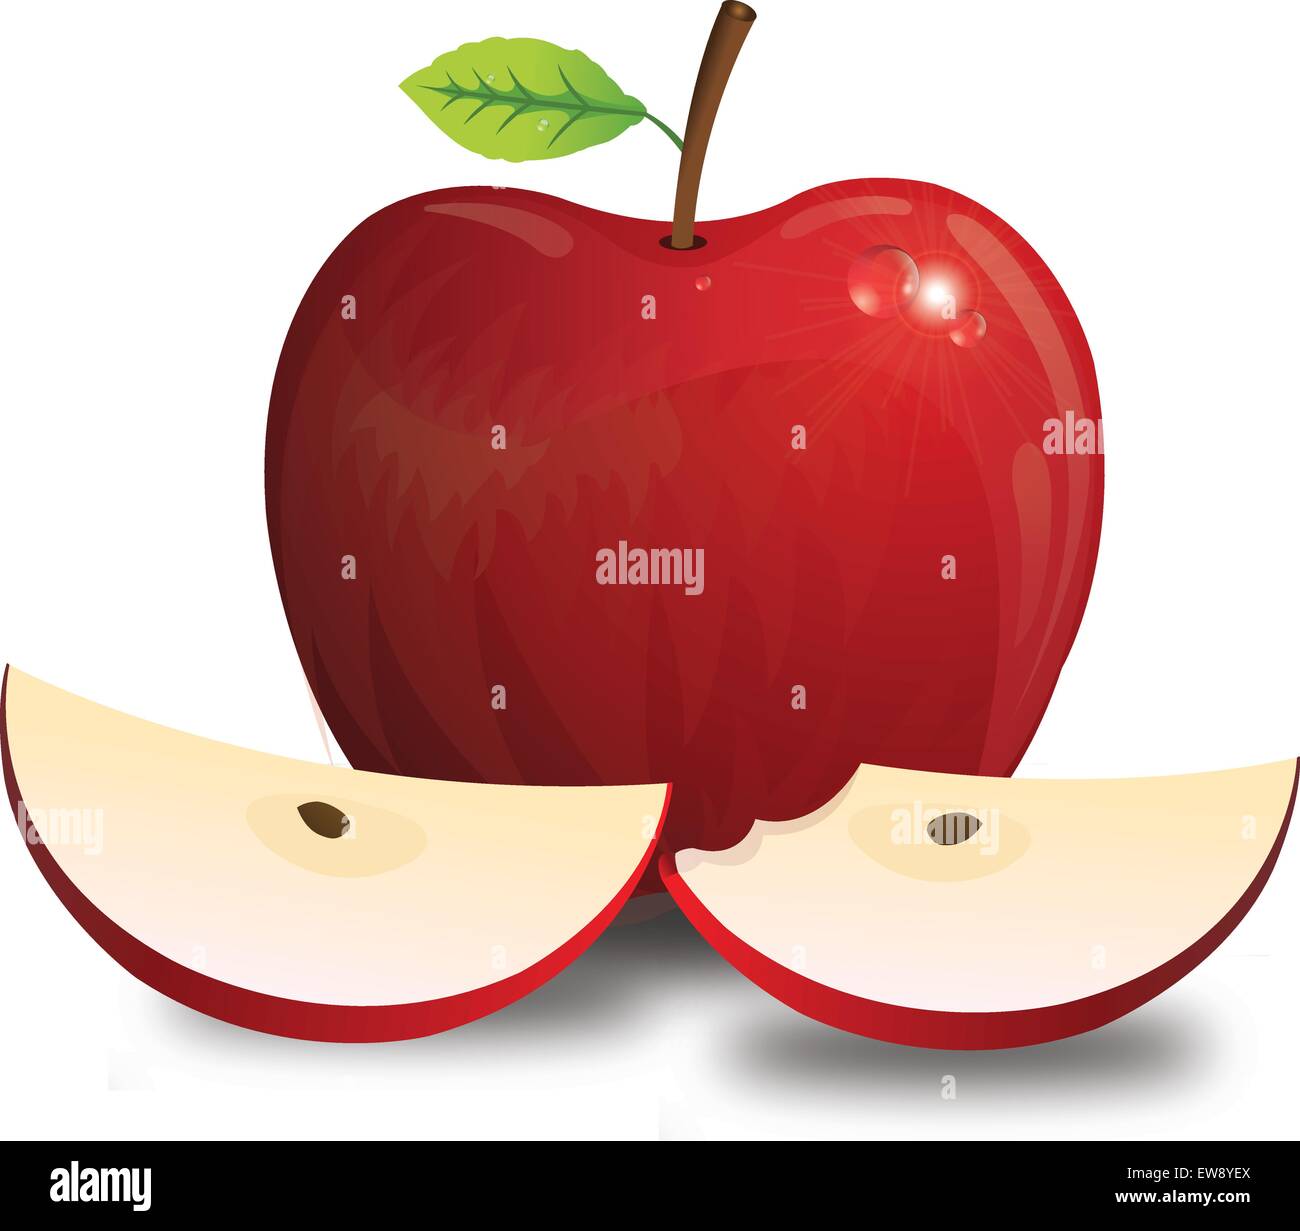 Apple, Fruit, Red, with Stem Leaf Seeds, Whole and Sliced, Bitten, vector illustration Stock Vector